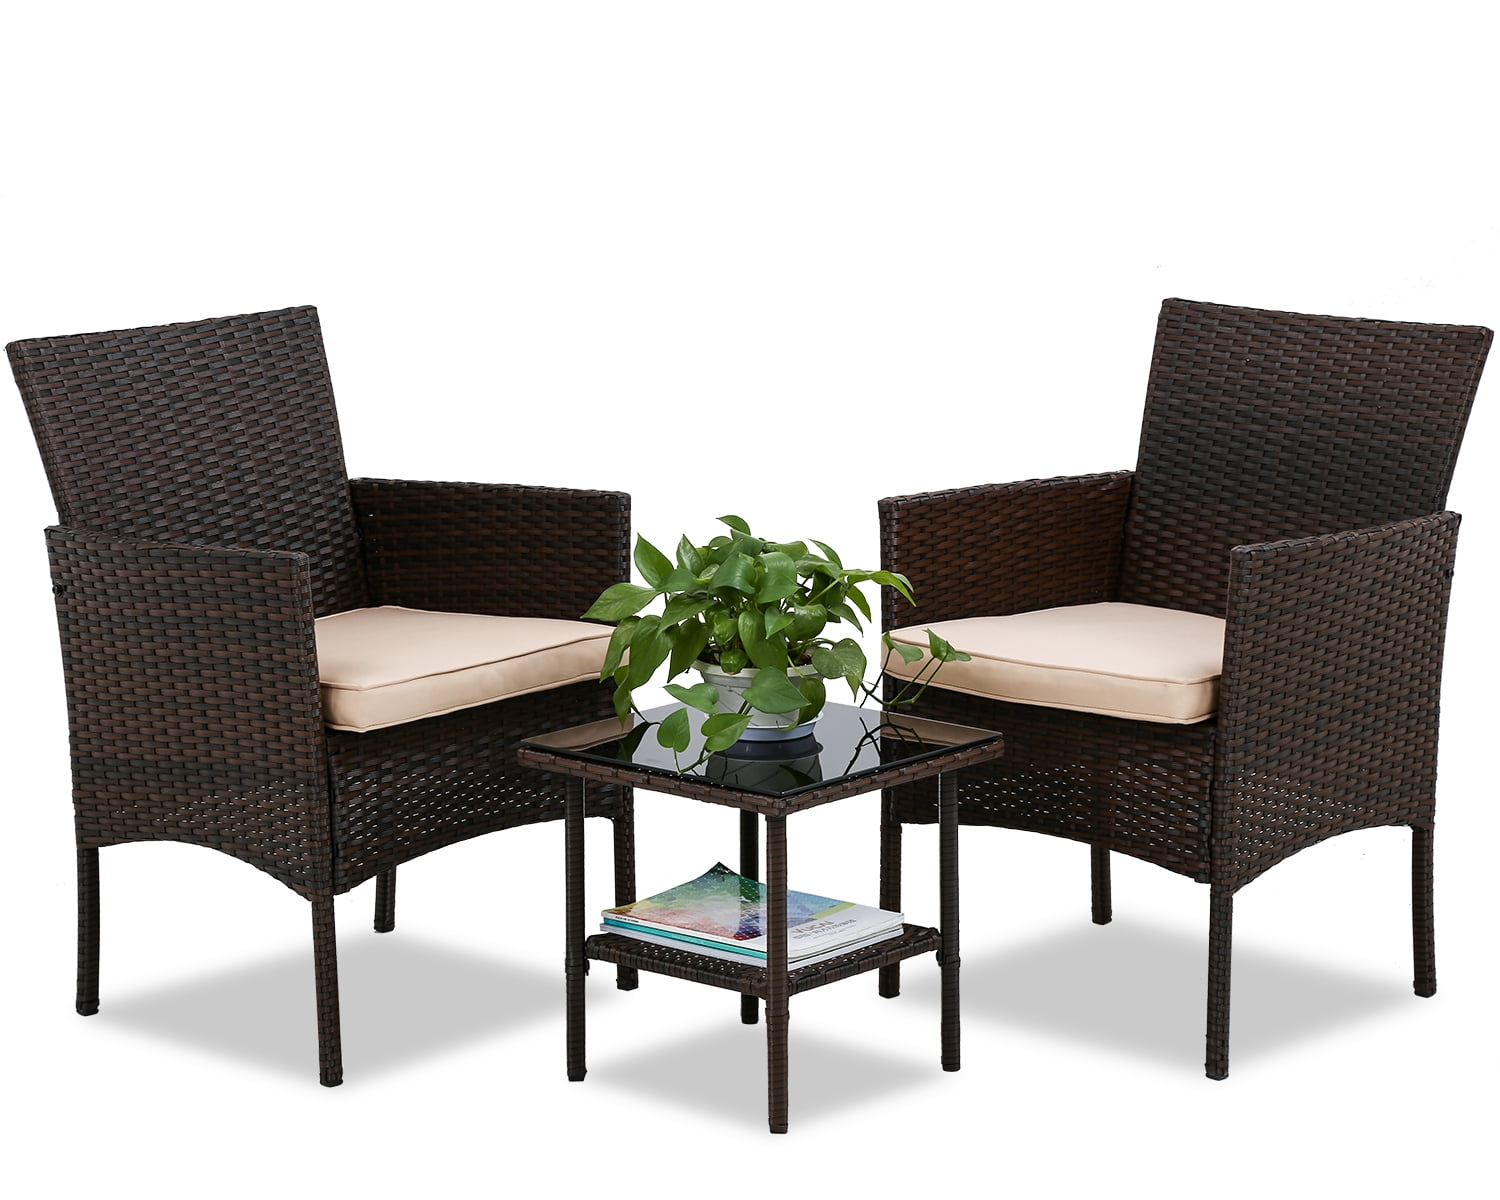 Outdoor Patio Set 3 Piece,Rocking Wicker Patio Furniture Modern Bistro Set Conversation Sets with Coffee Table for Yard and Bistro 